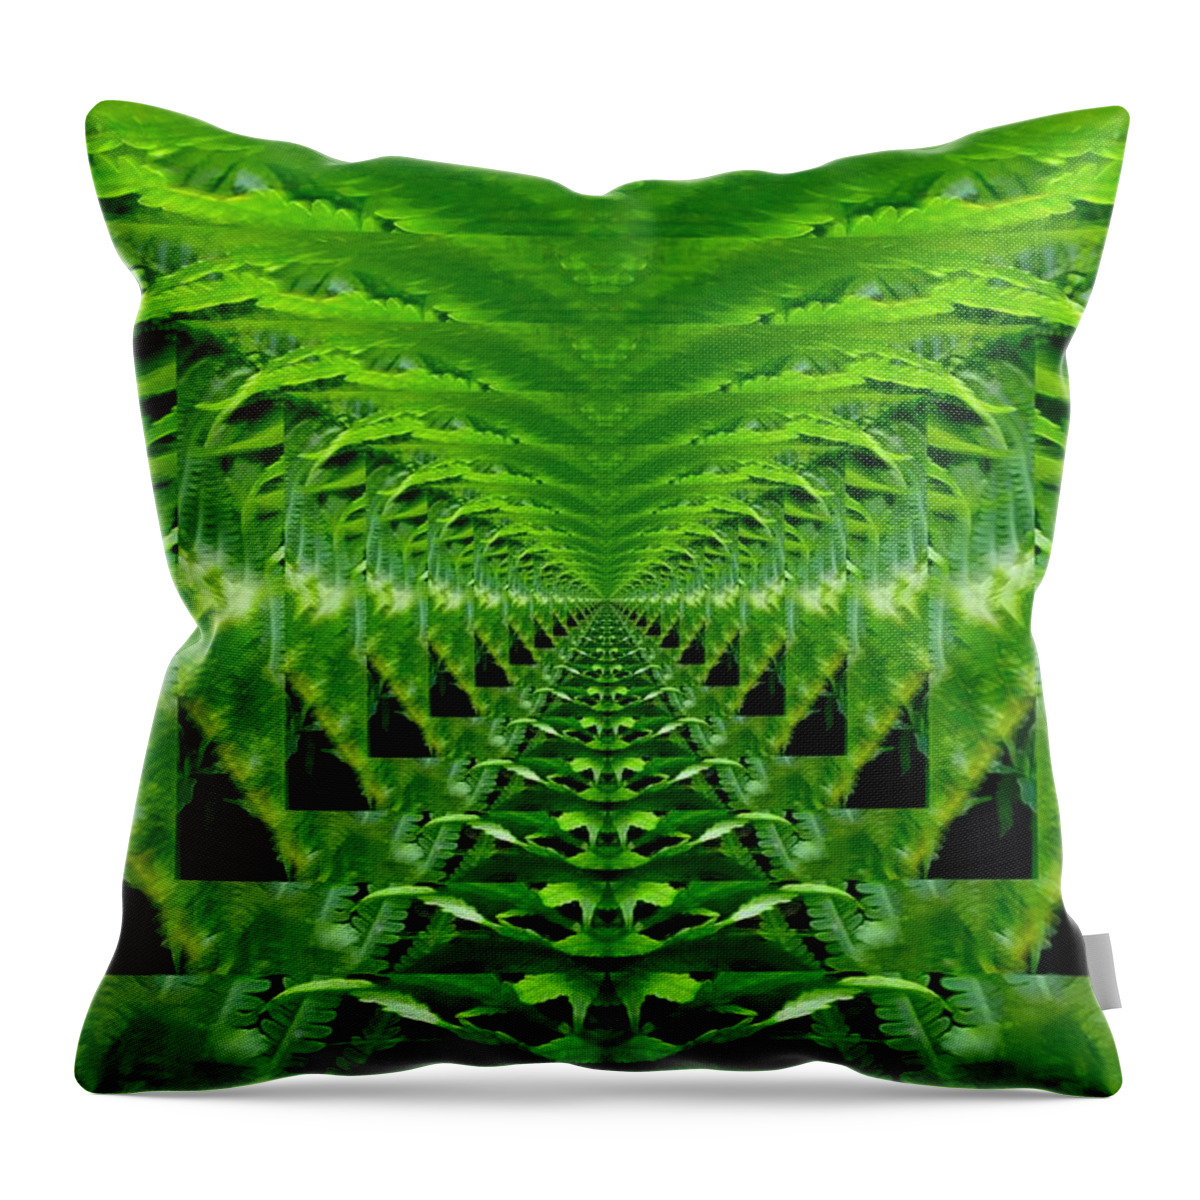 Abstract Throw Pillow featuring the digital art In The Ferns 7 by Lyle Crump